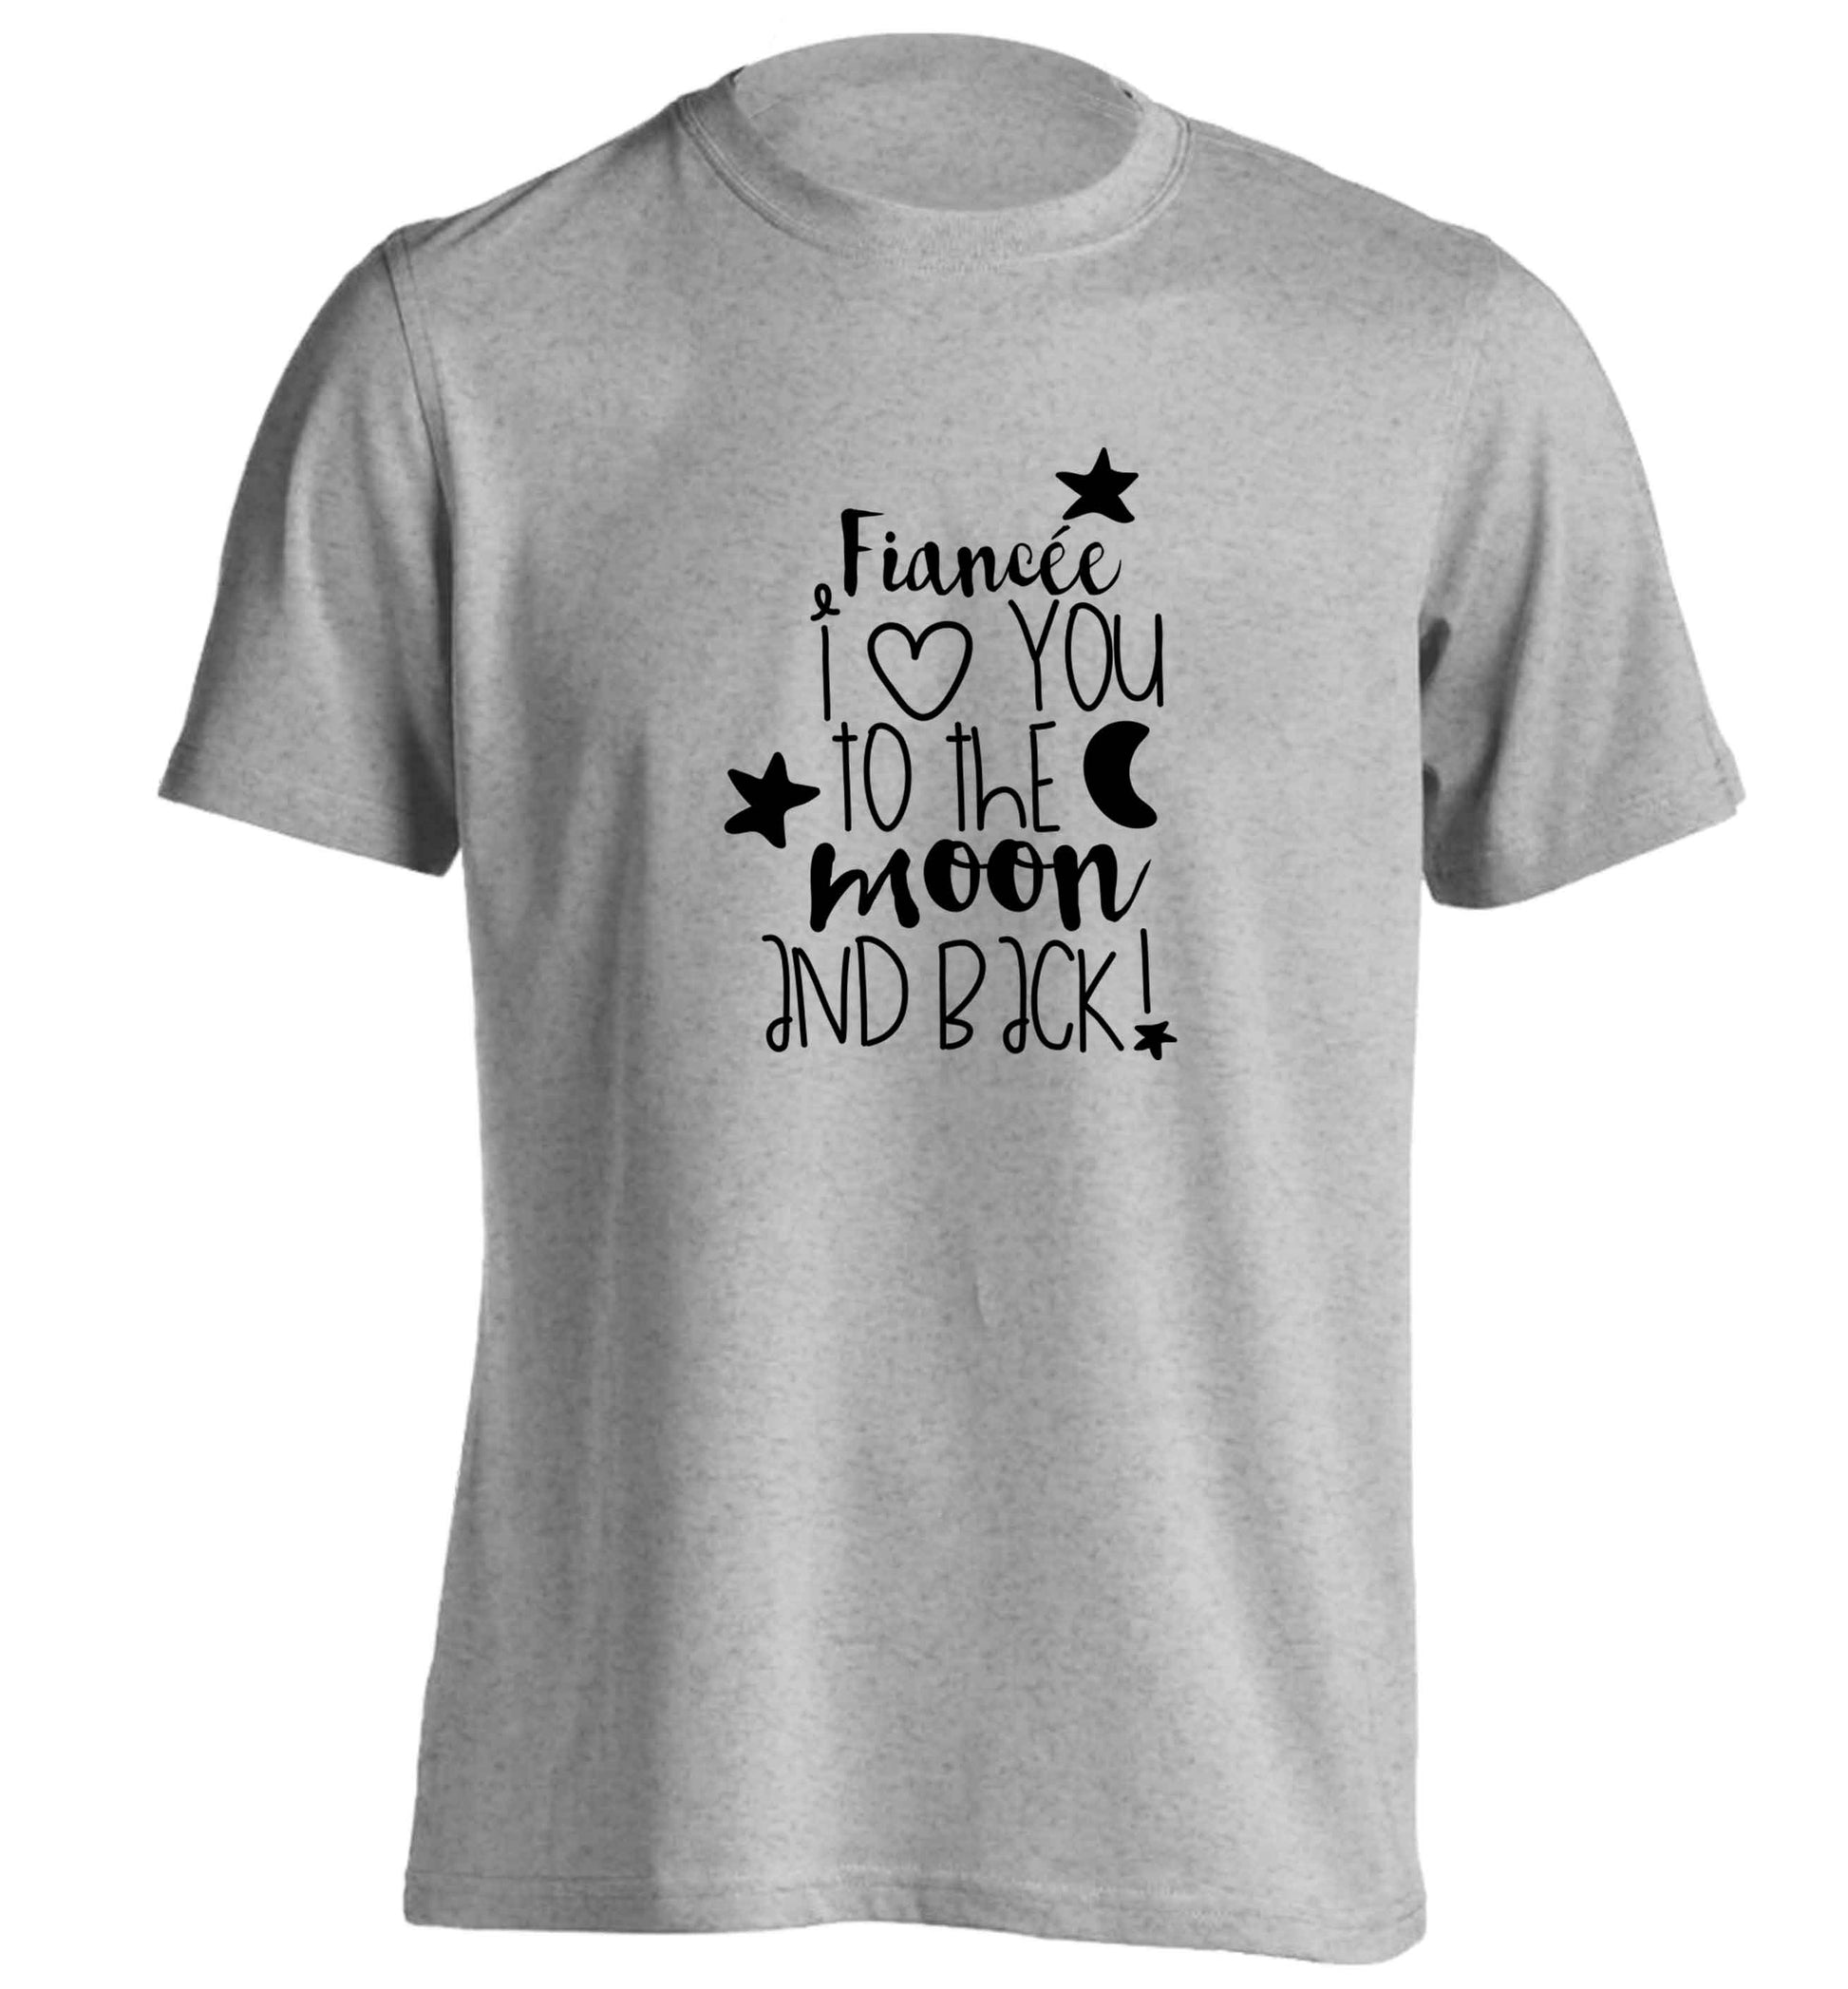 Fianc√©e I love you to the moon and back adults unisex grey Tshirt 2XL